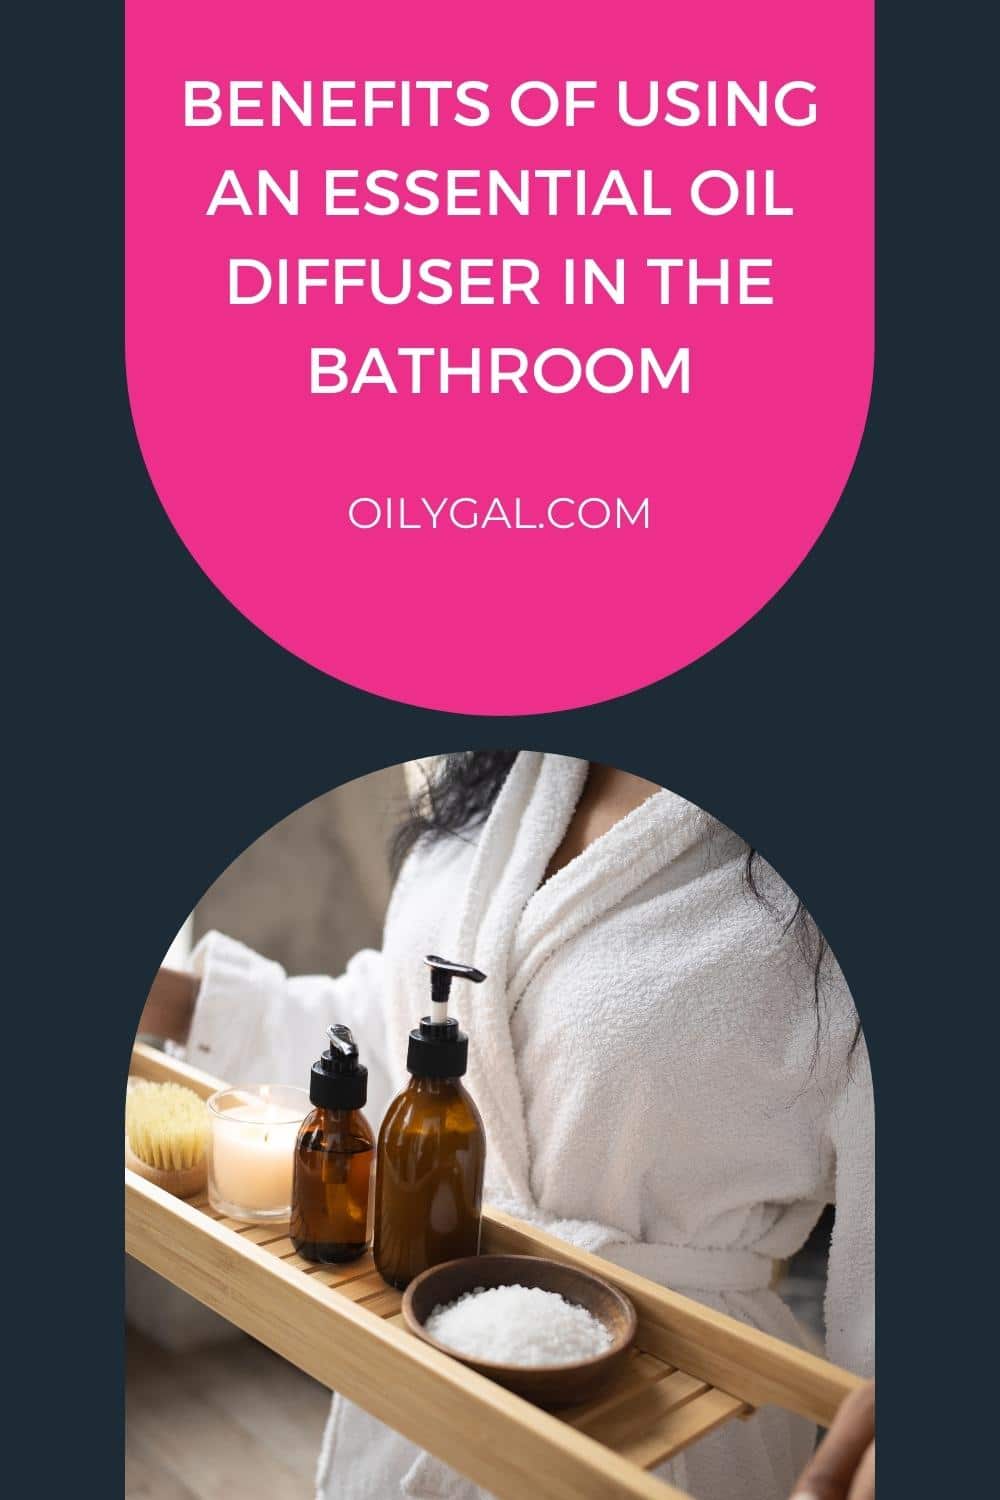 Benefits of using an essential oil diffuser in the bathroom